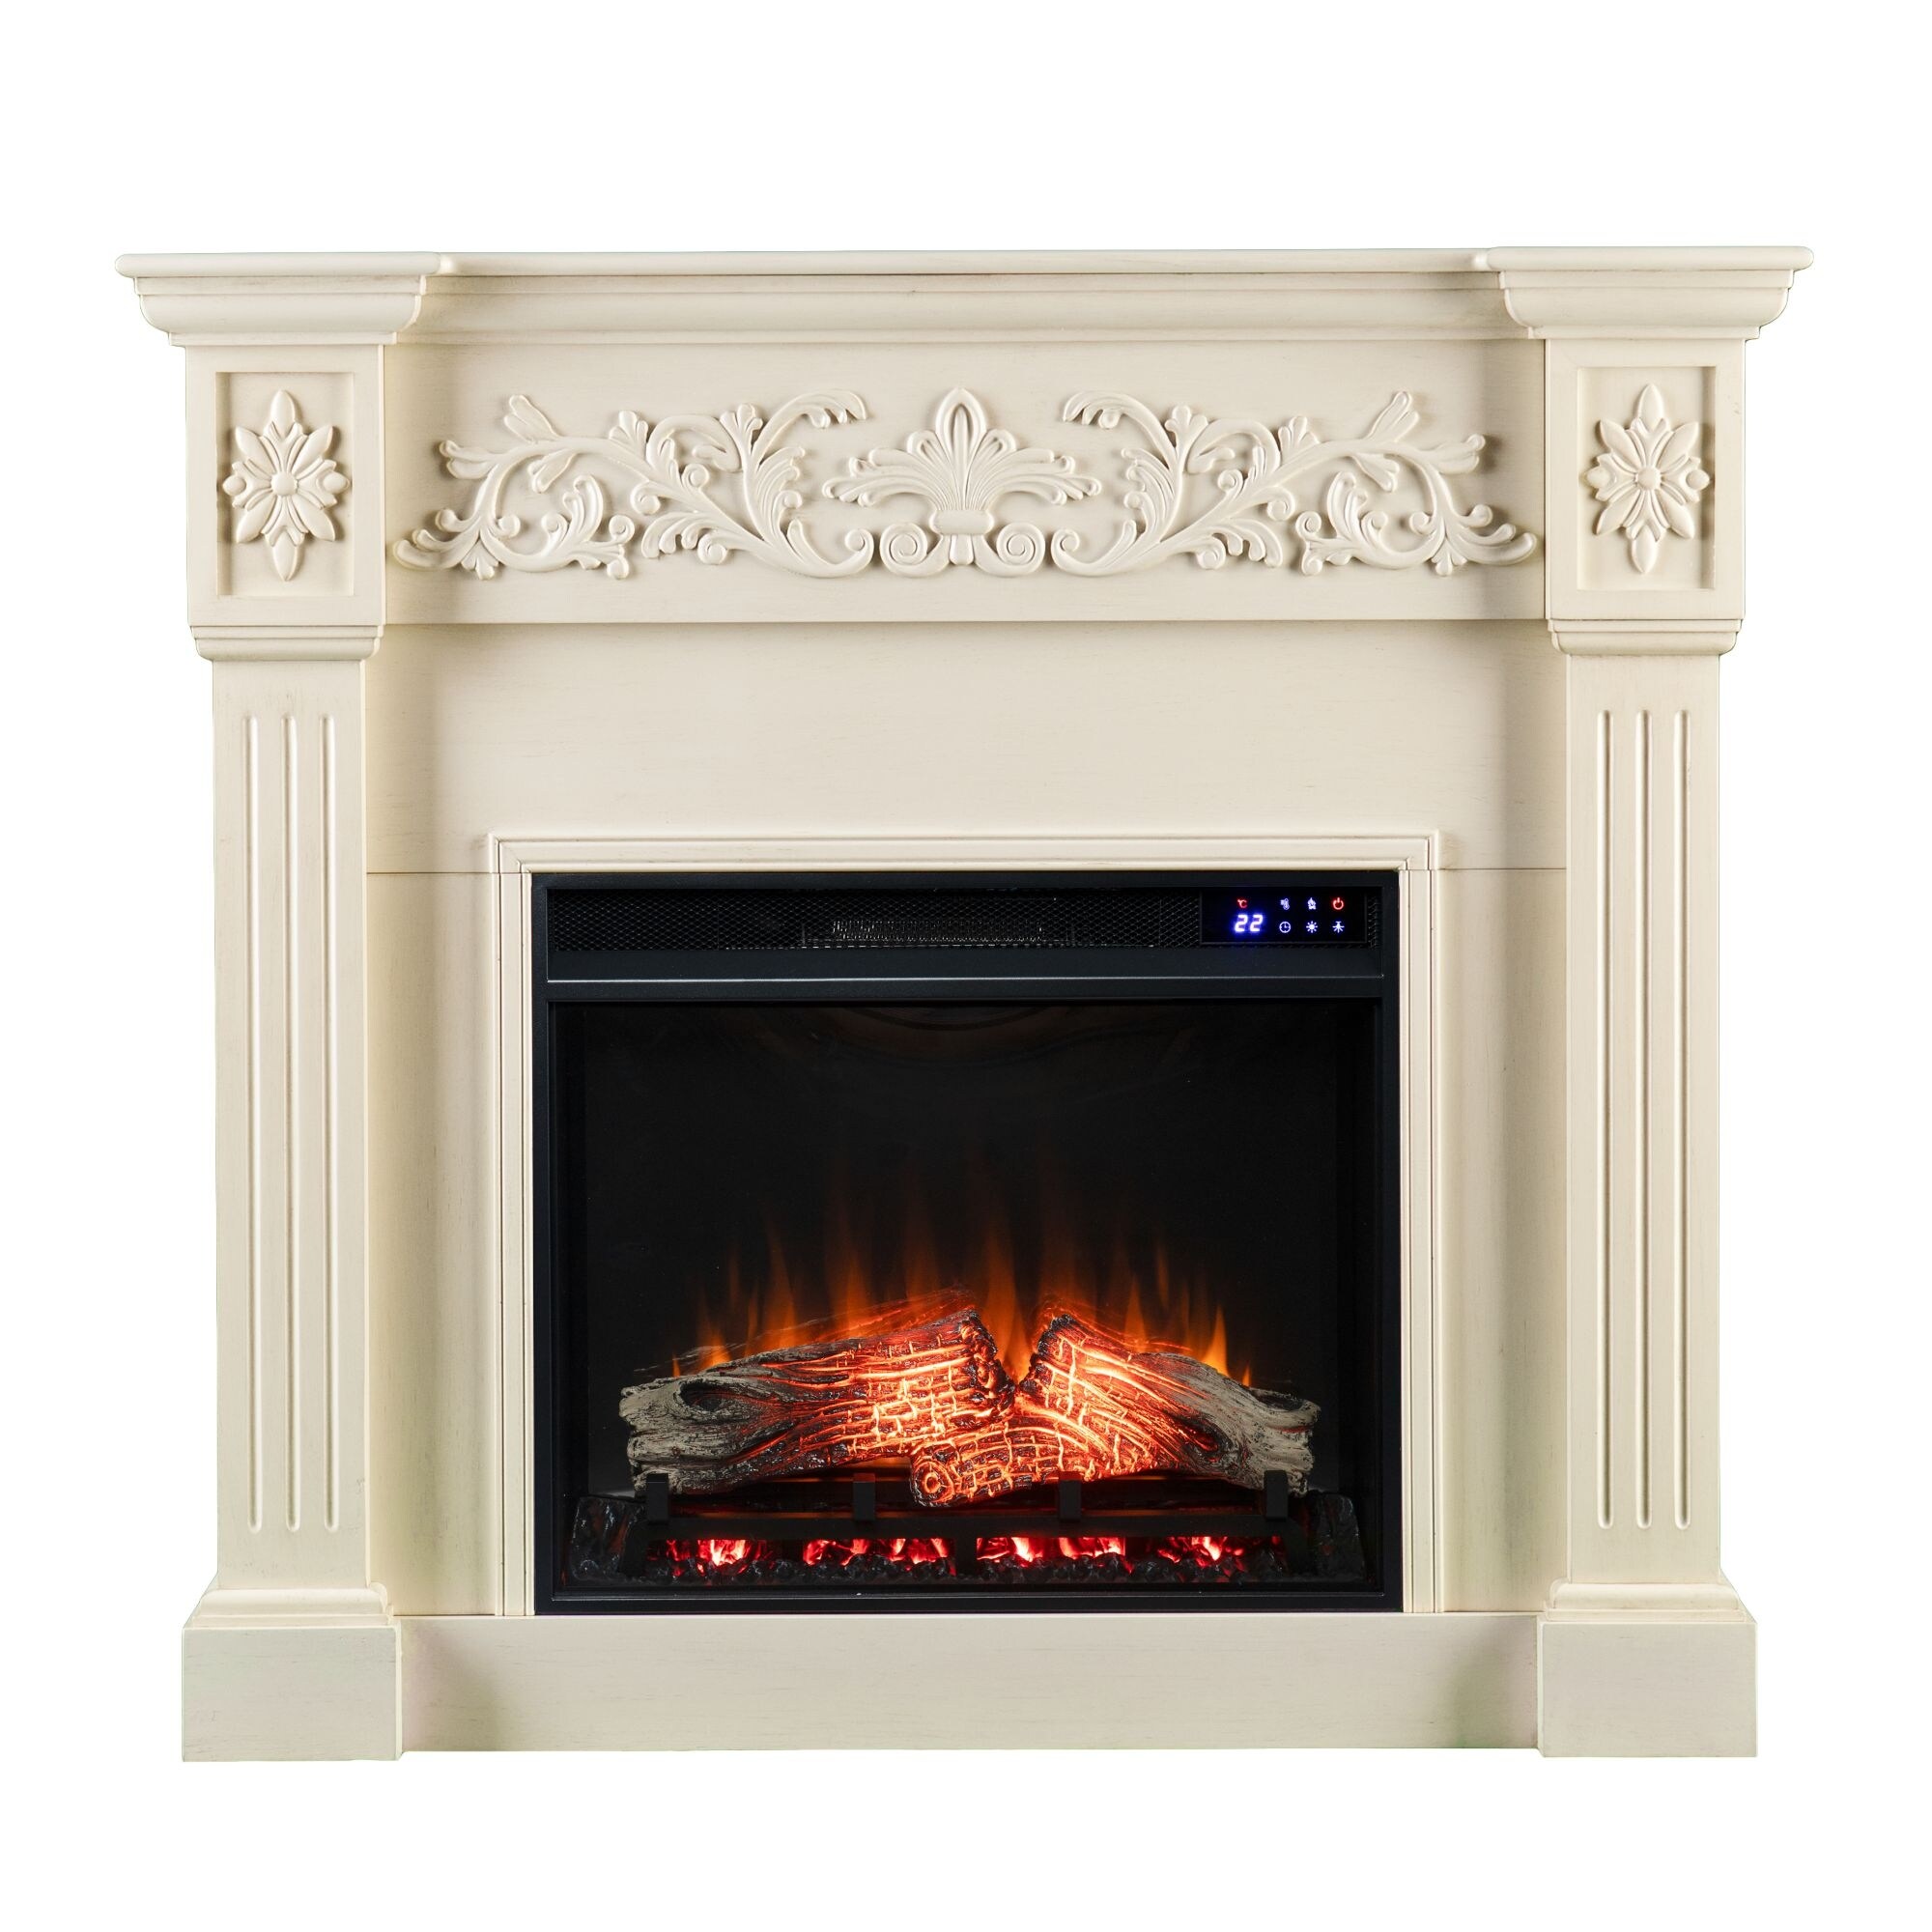 Southern Enterprises 44.5 inch Ivory and Black Classic Style Electric Fireplace with Carved Mantel